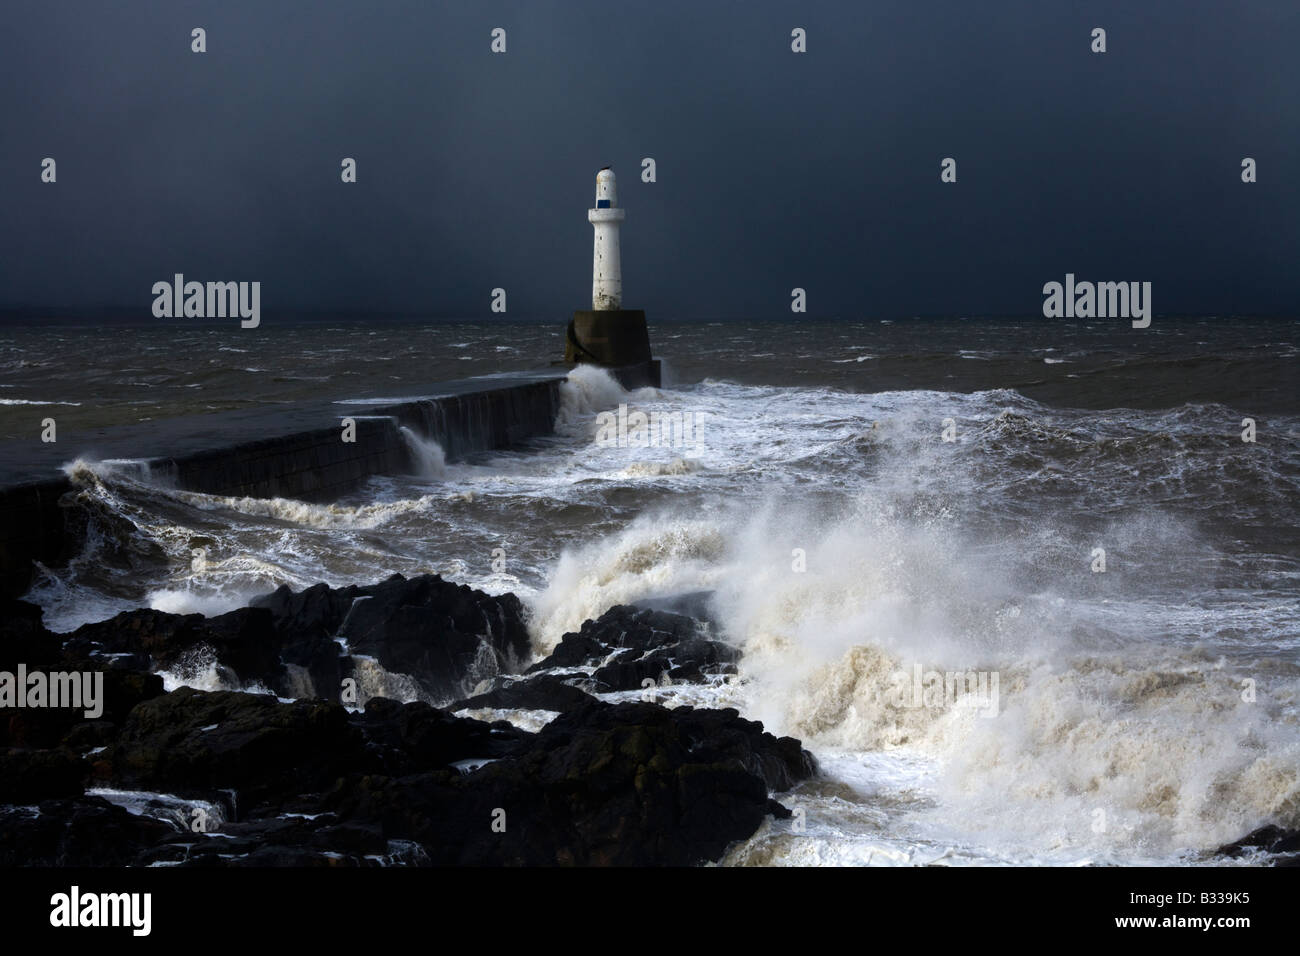 Severe weather battering one of the lighthouses marking the entrance to Aberdeen Harbour, Aberdeenshire, Scotland Stock Photo